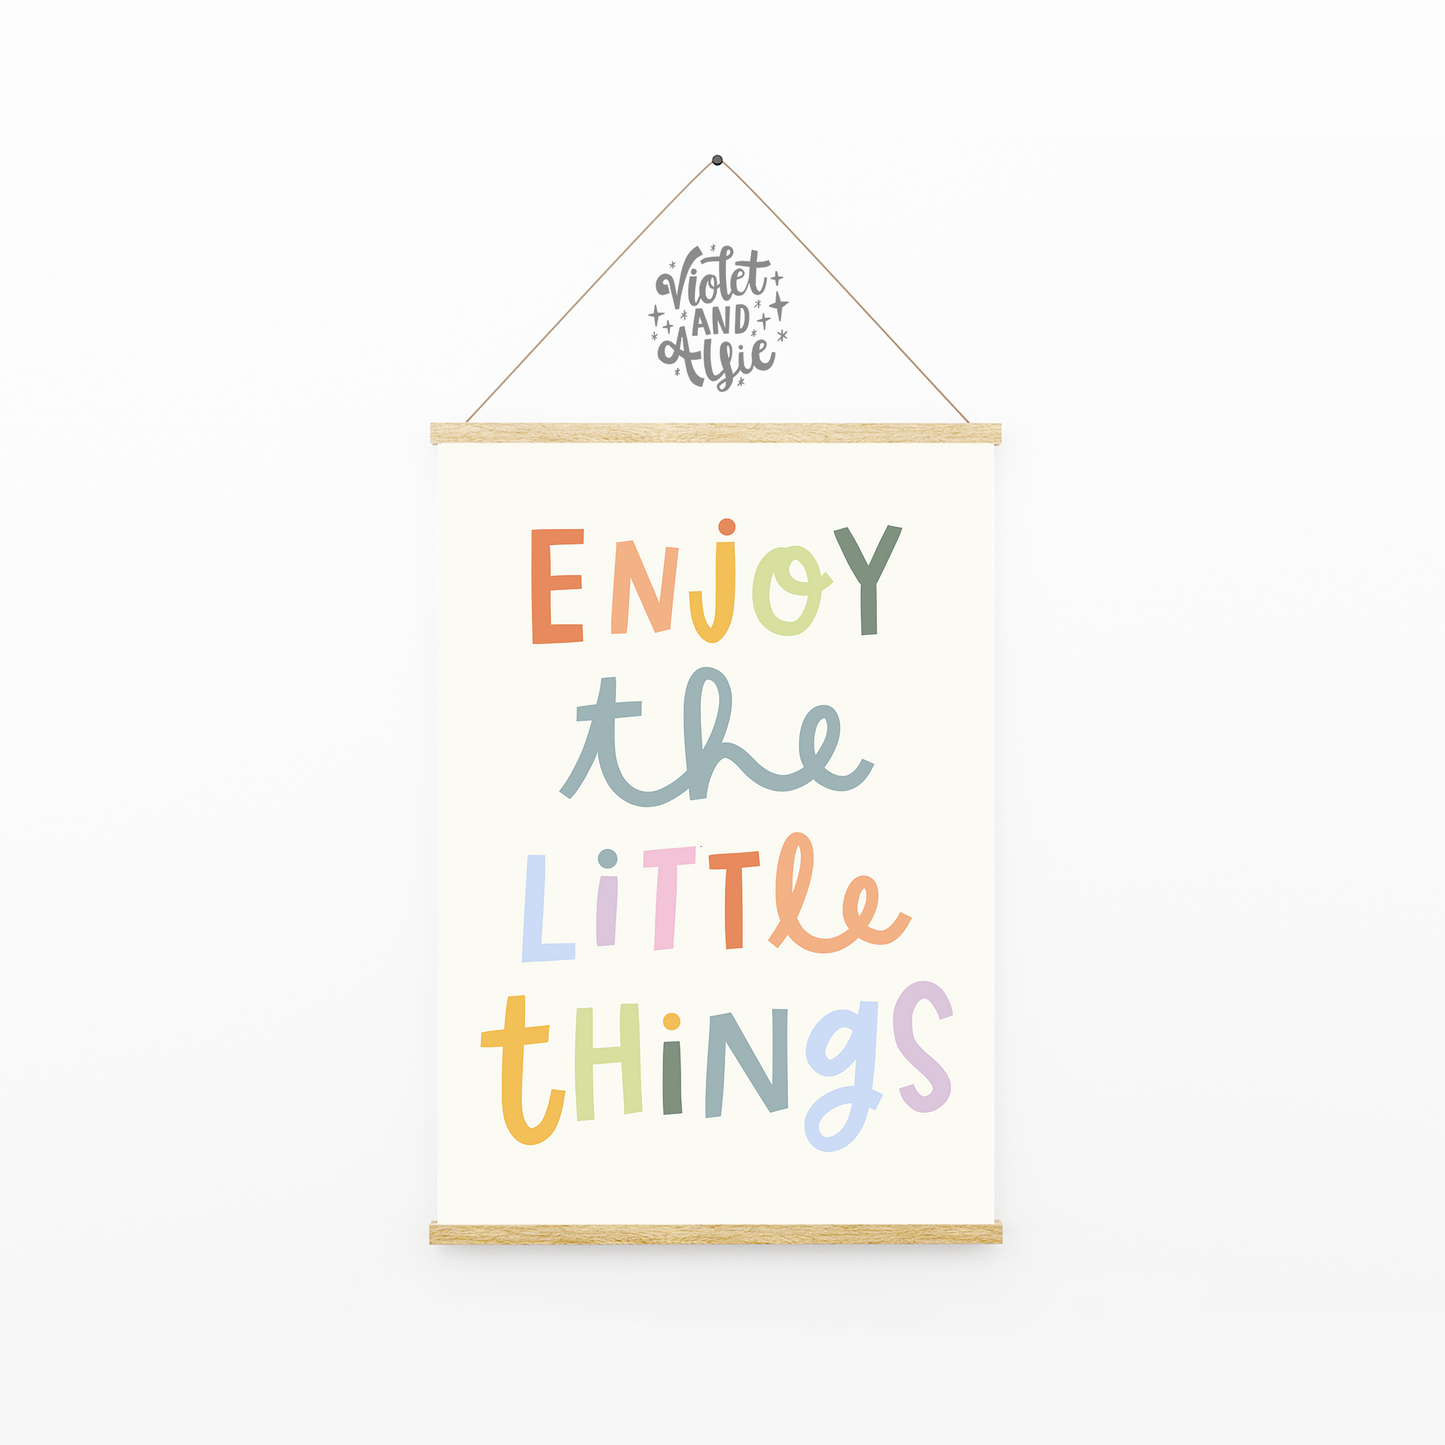 enjoy the little things, warm pastel tones, Nursery Print, Baby Wall Art, Love Quote Print, Typographic Wall Art for Baby Room, Prints For Nursery, Boho Nursery Decor, Pastel   Rainbow Decor, Baby Prints A5 A4 A3 size